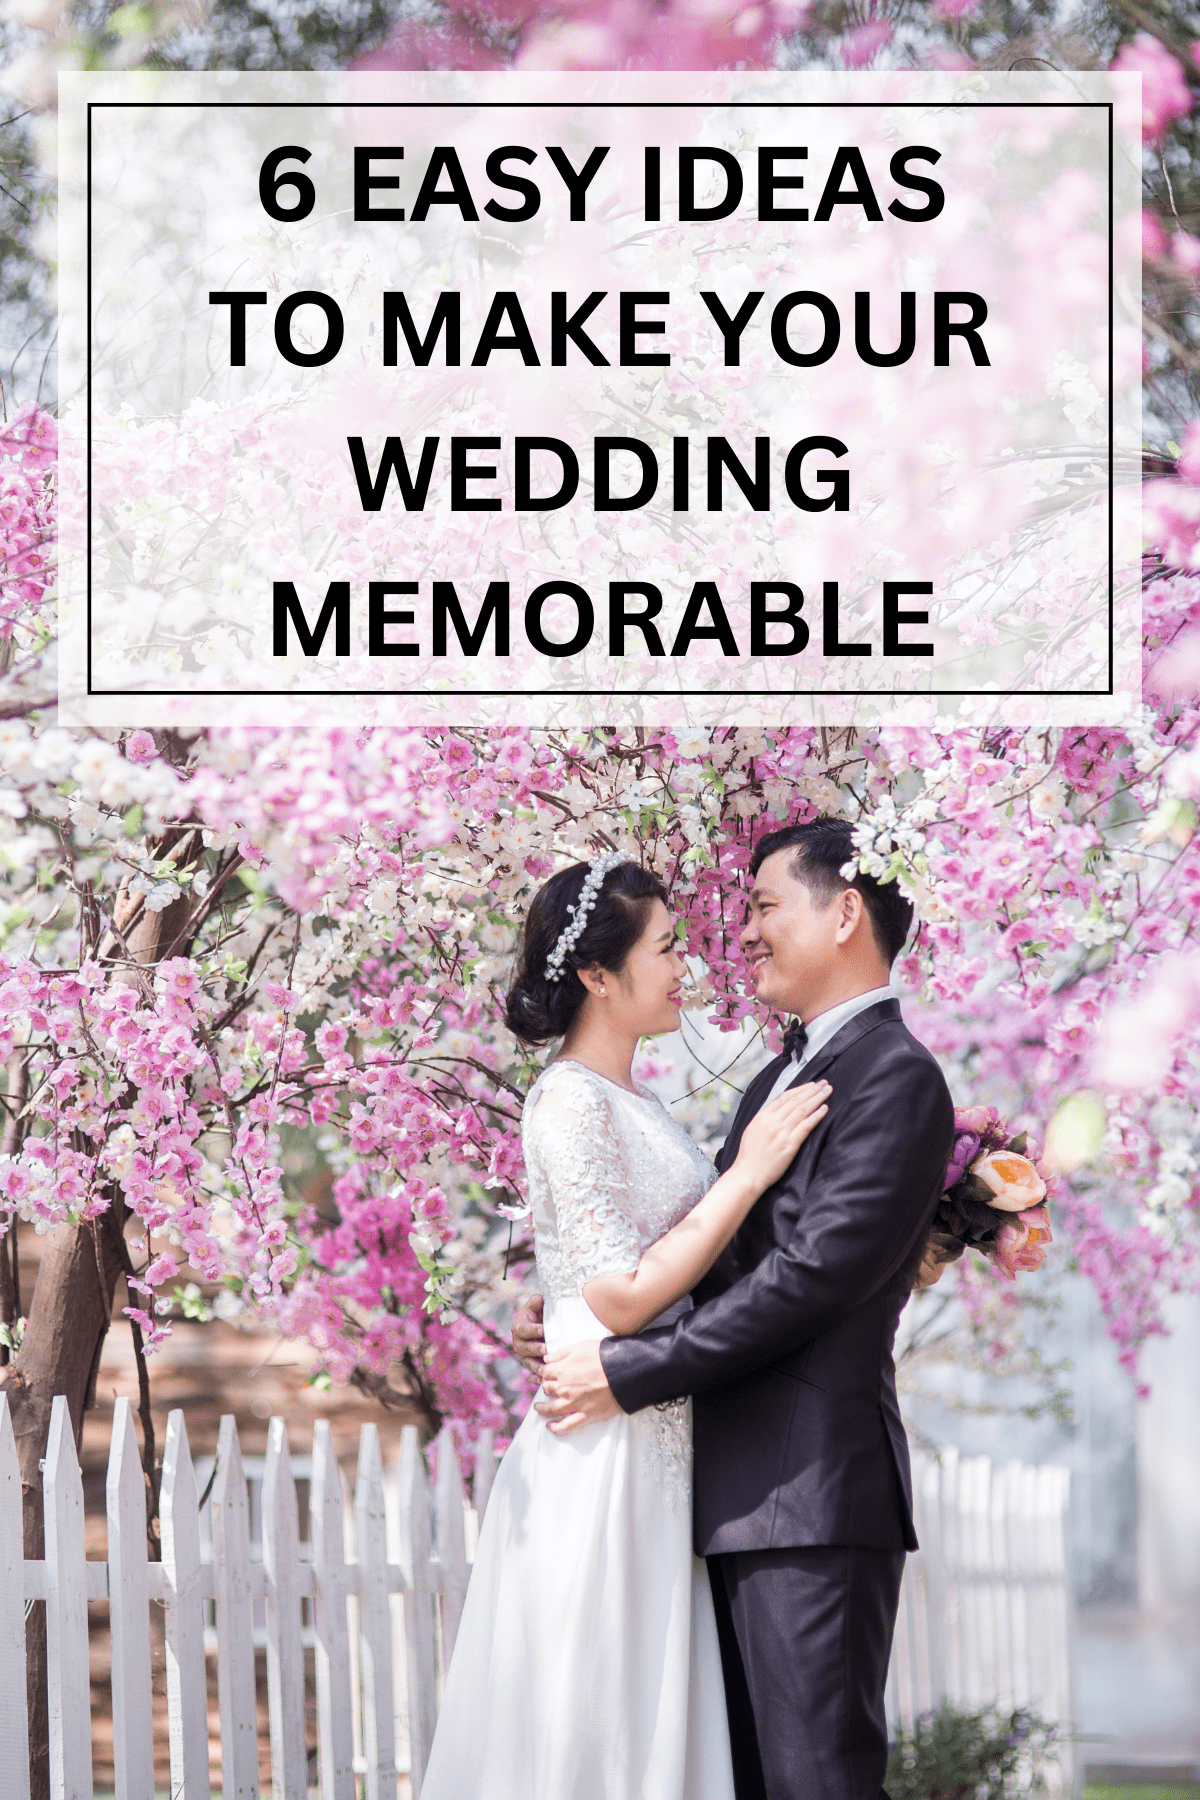 6 Easy Ideas to Make Your Wedding Into the One Everyone Will Remember for Decades